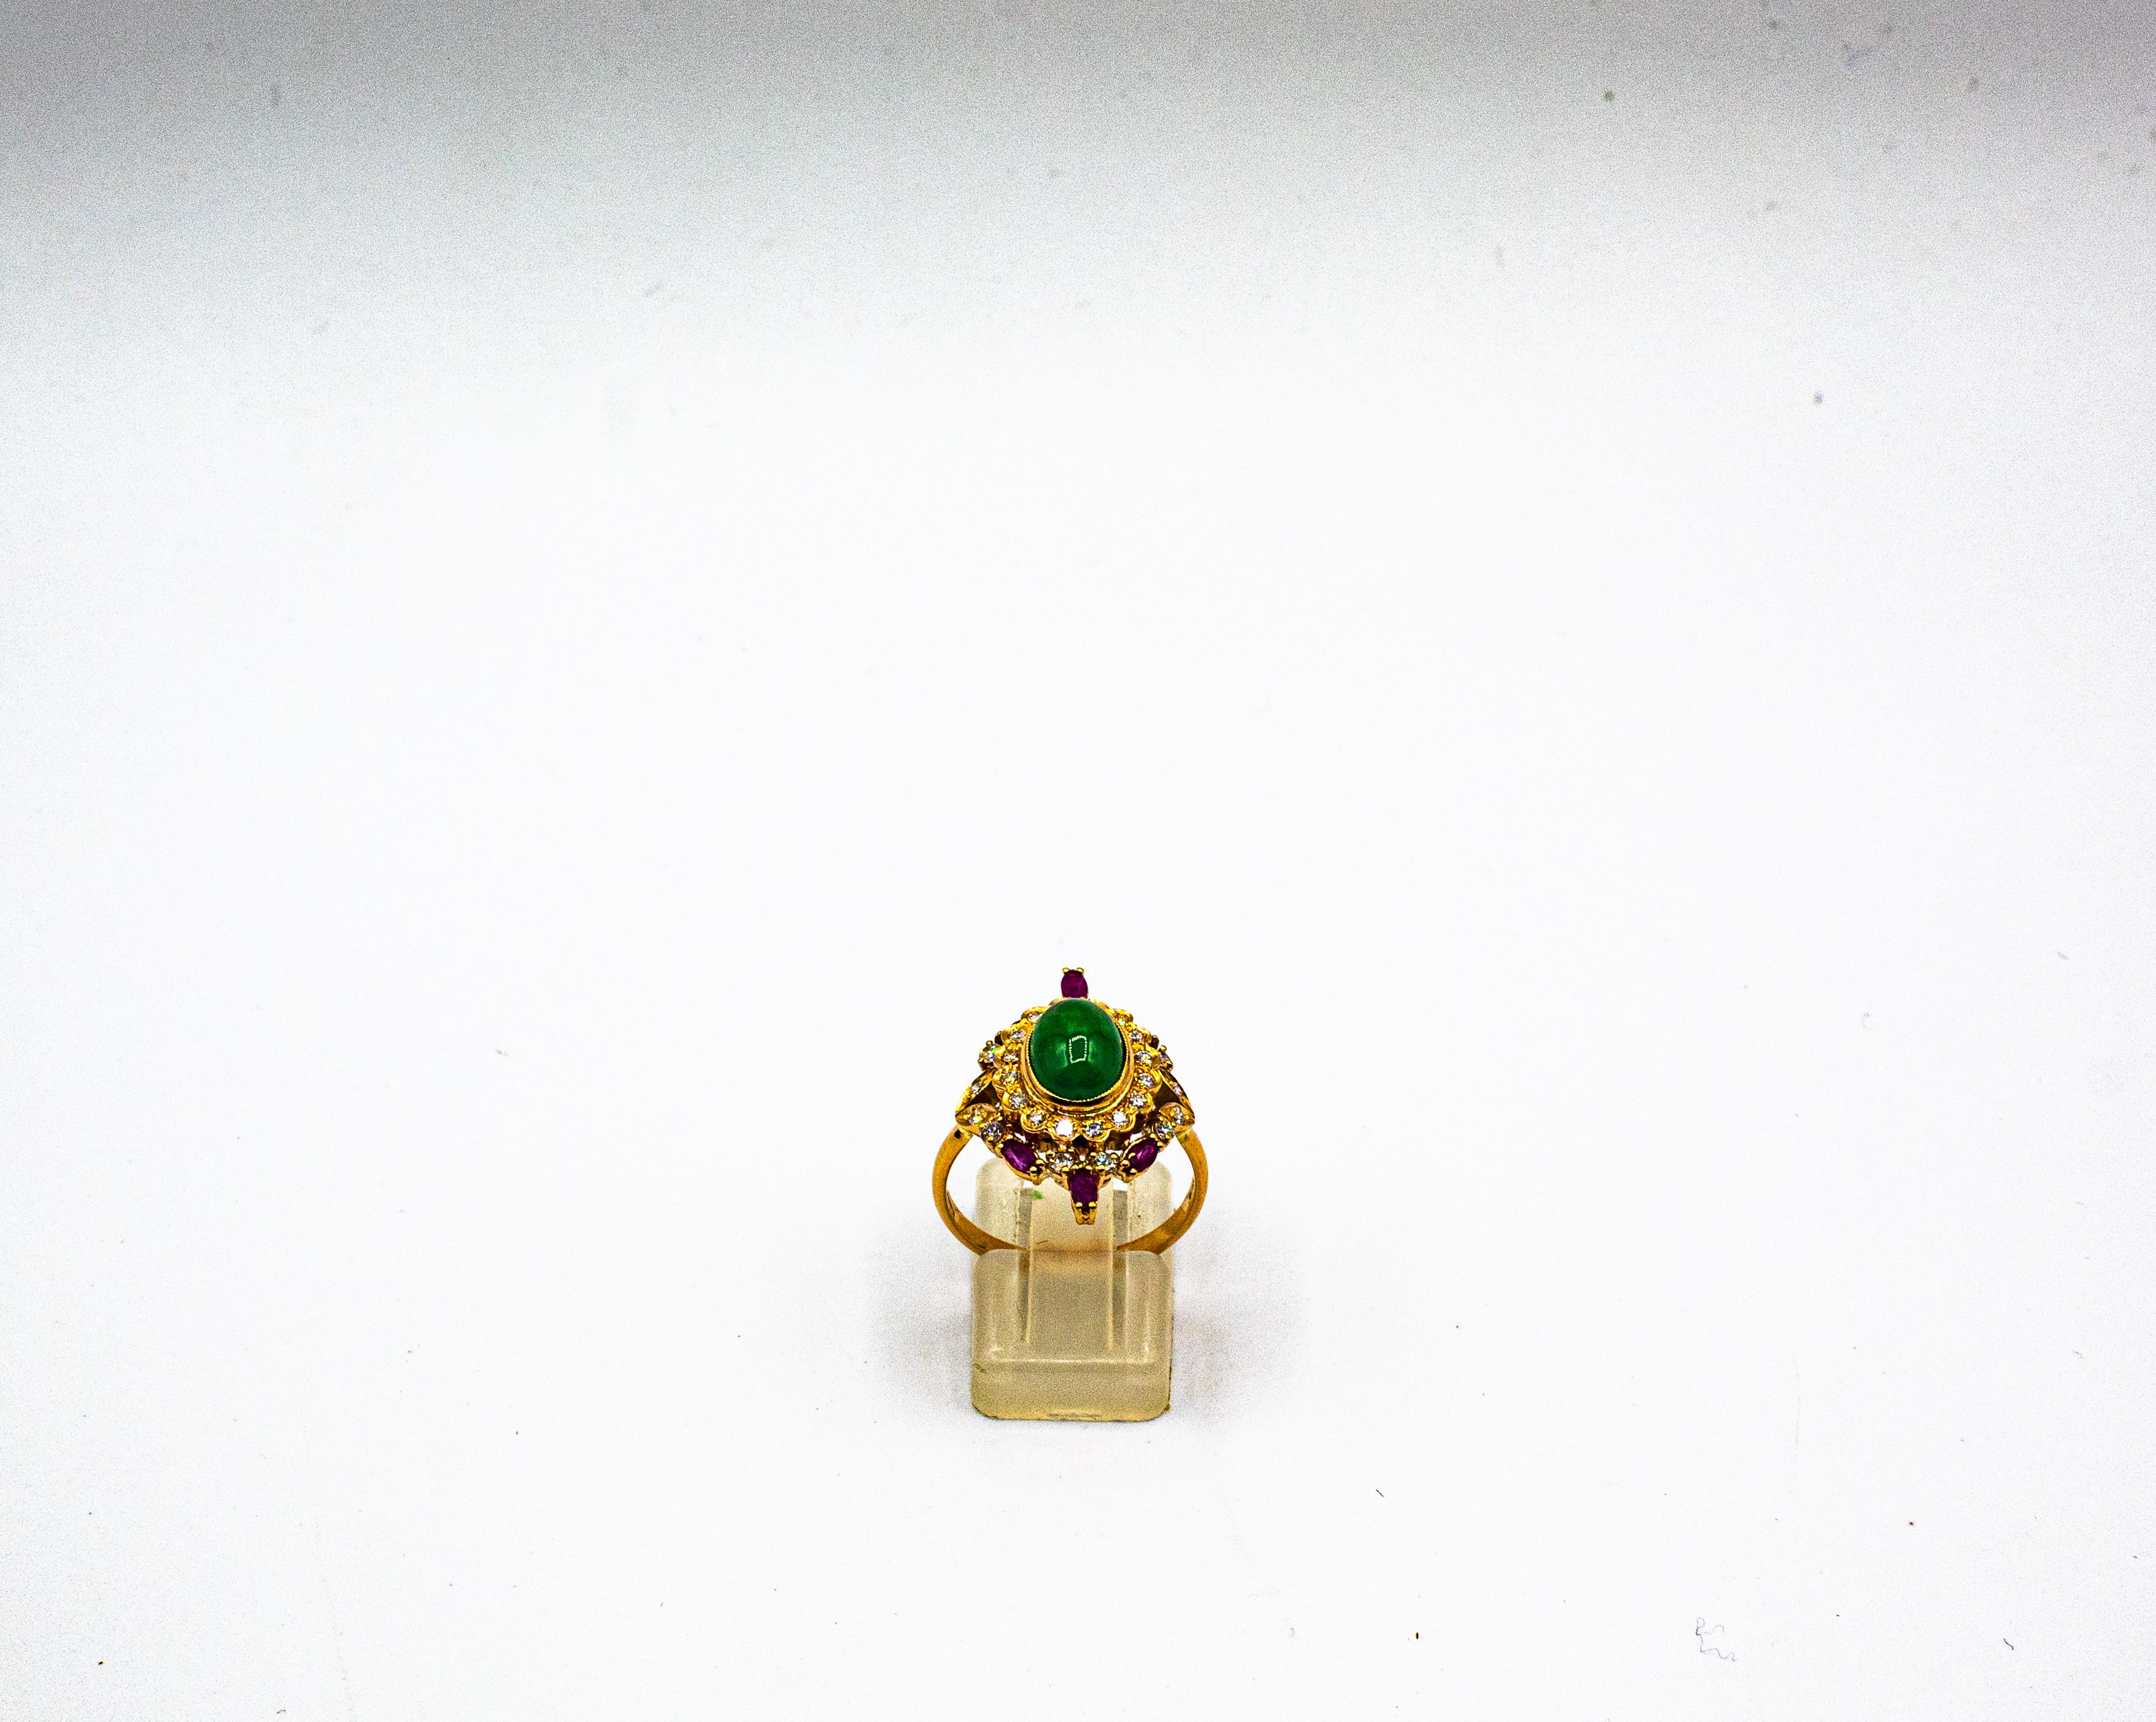 This Ring is made of 9K Yellow Gold.
This Ring has 0.45 Carats of White Brilliant Cut Diamonds.
This Ring has a 2.10 Carats Cabochon Cut Emerald.
This Ring has 0.60 Carats of Marquise Cut Rubies.

This Ring is available also in 14 or 18K Yellow or